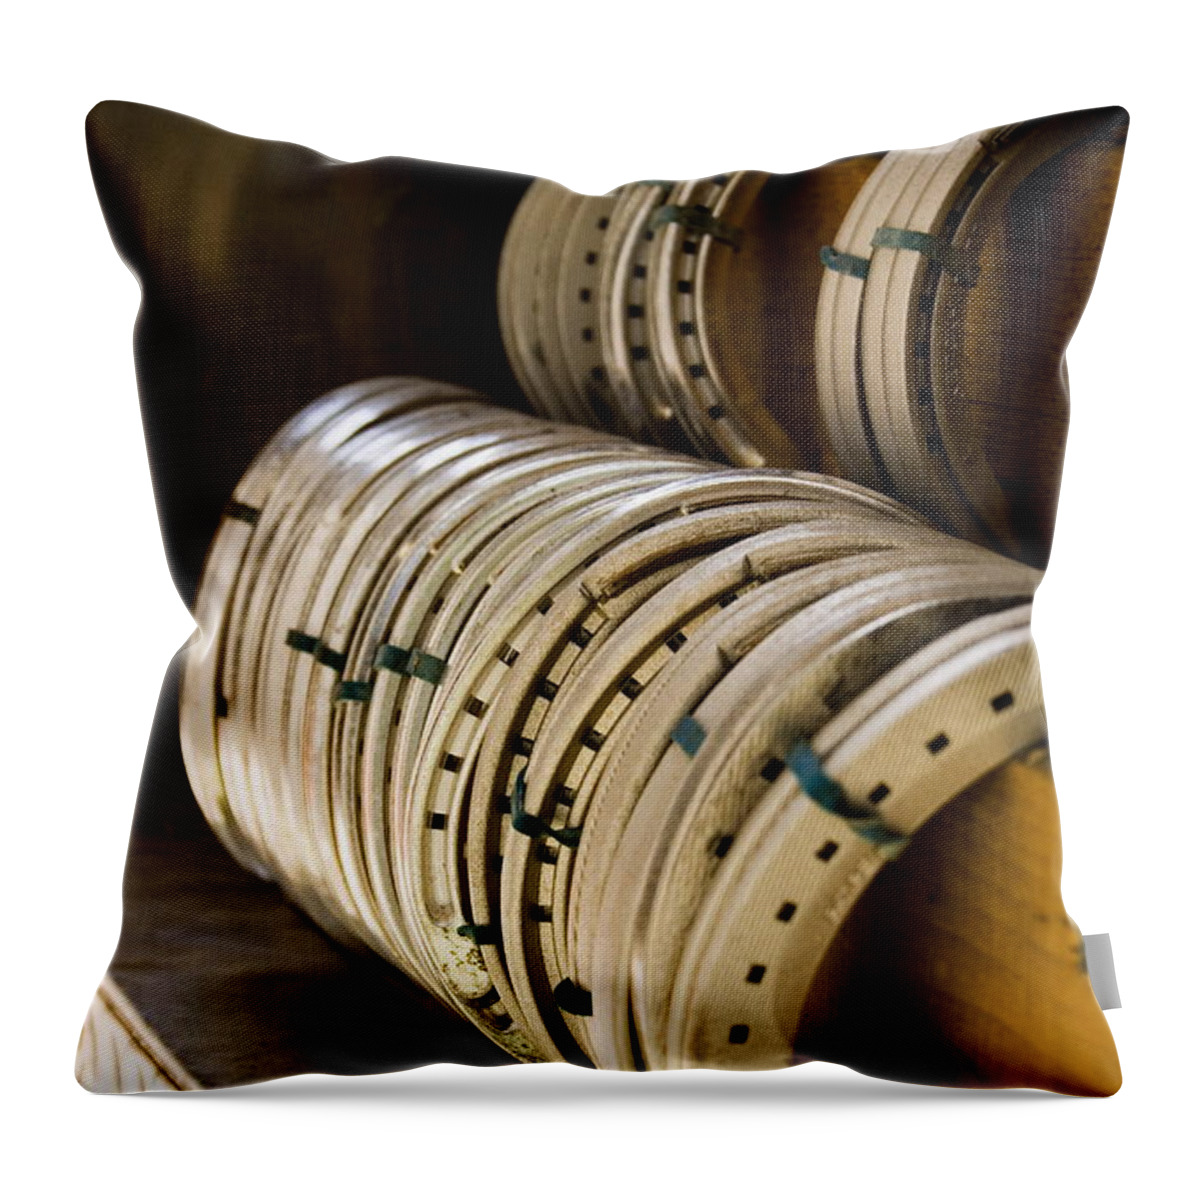 Farrier Throw Pillow featuring the photograph Horse Shoes by Angela Rath